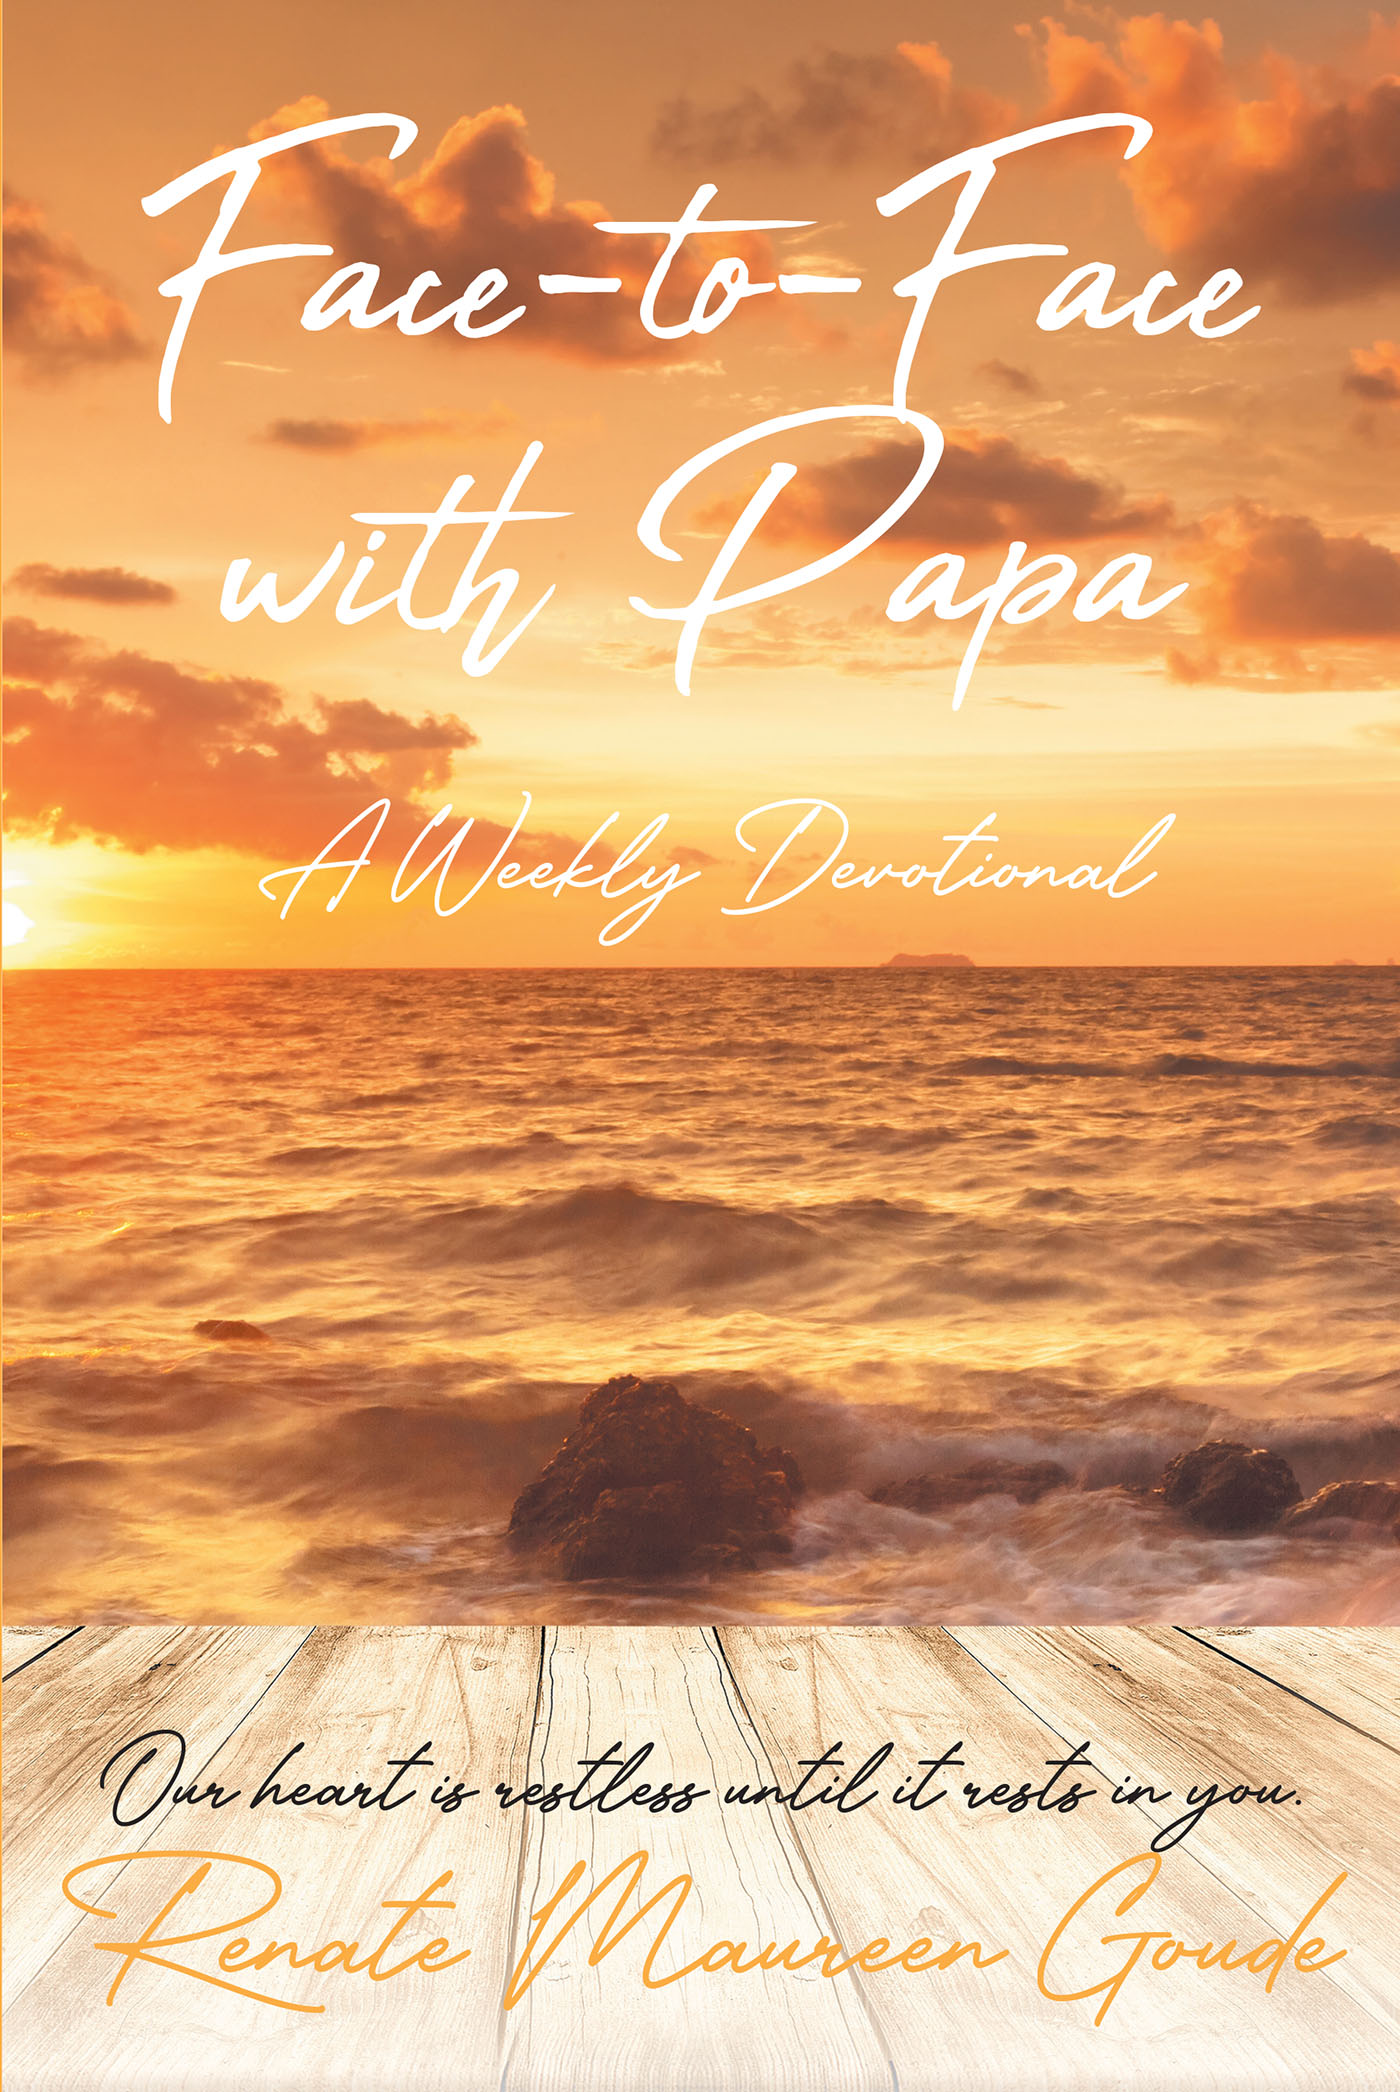 Author Renate Maureen Goude’s New Book, “Face-to-Face with Papa: A Weekly Devotional,” Offers a Highly Devoted Reset to All the Lovers of God